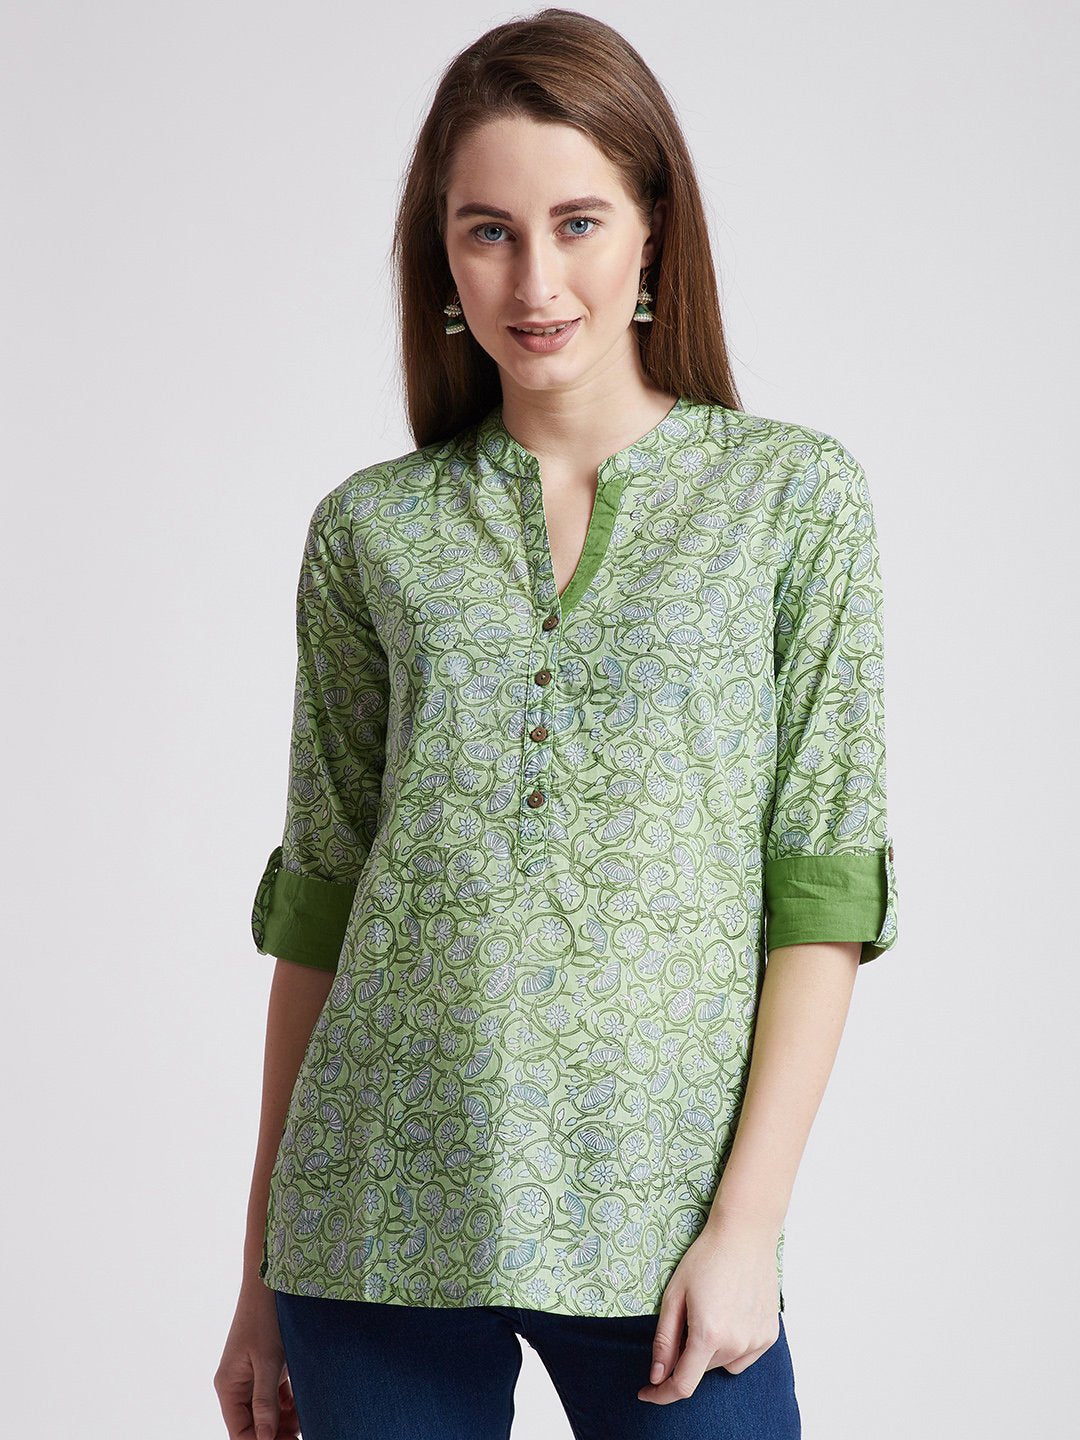 Hand Block Printed Indian Kurti in pastel green floral design with